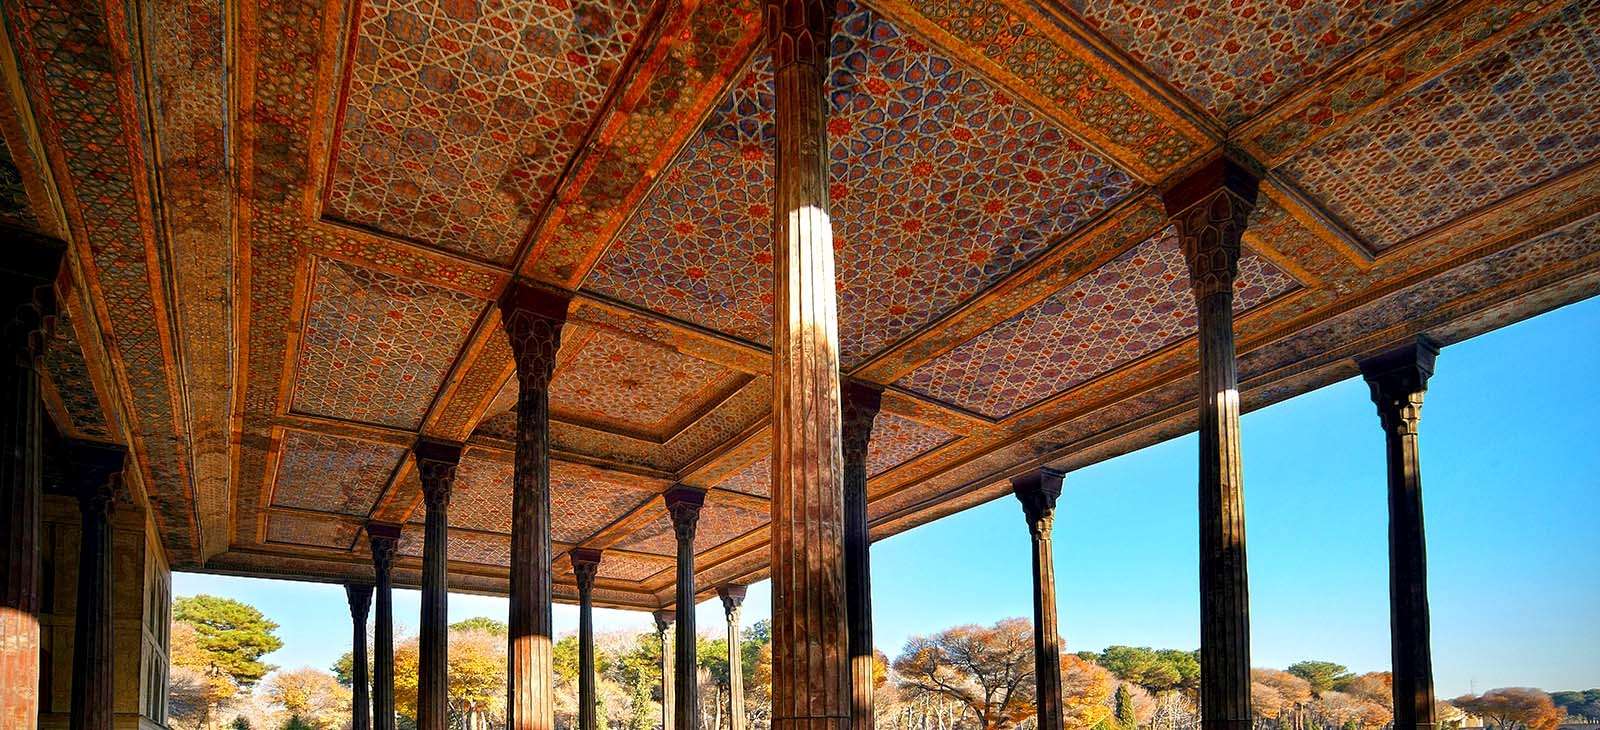 Ceiling of the talar of Chehel Sutun jigsaw puzzle online